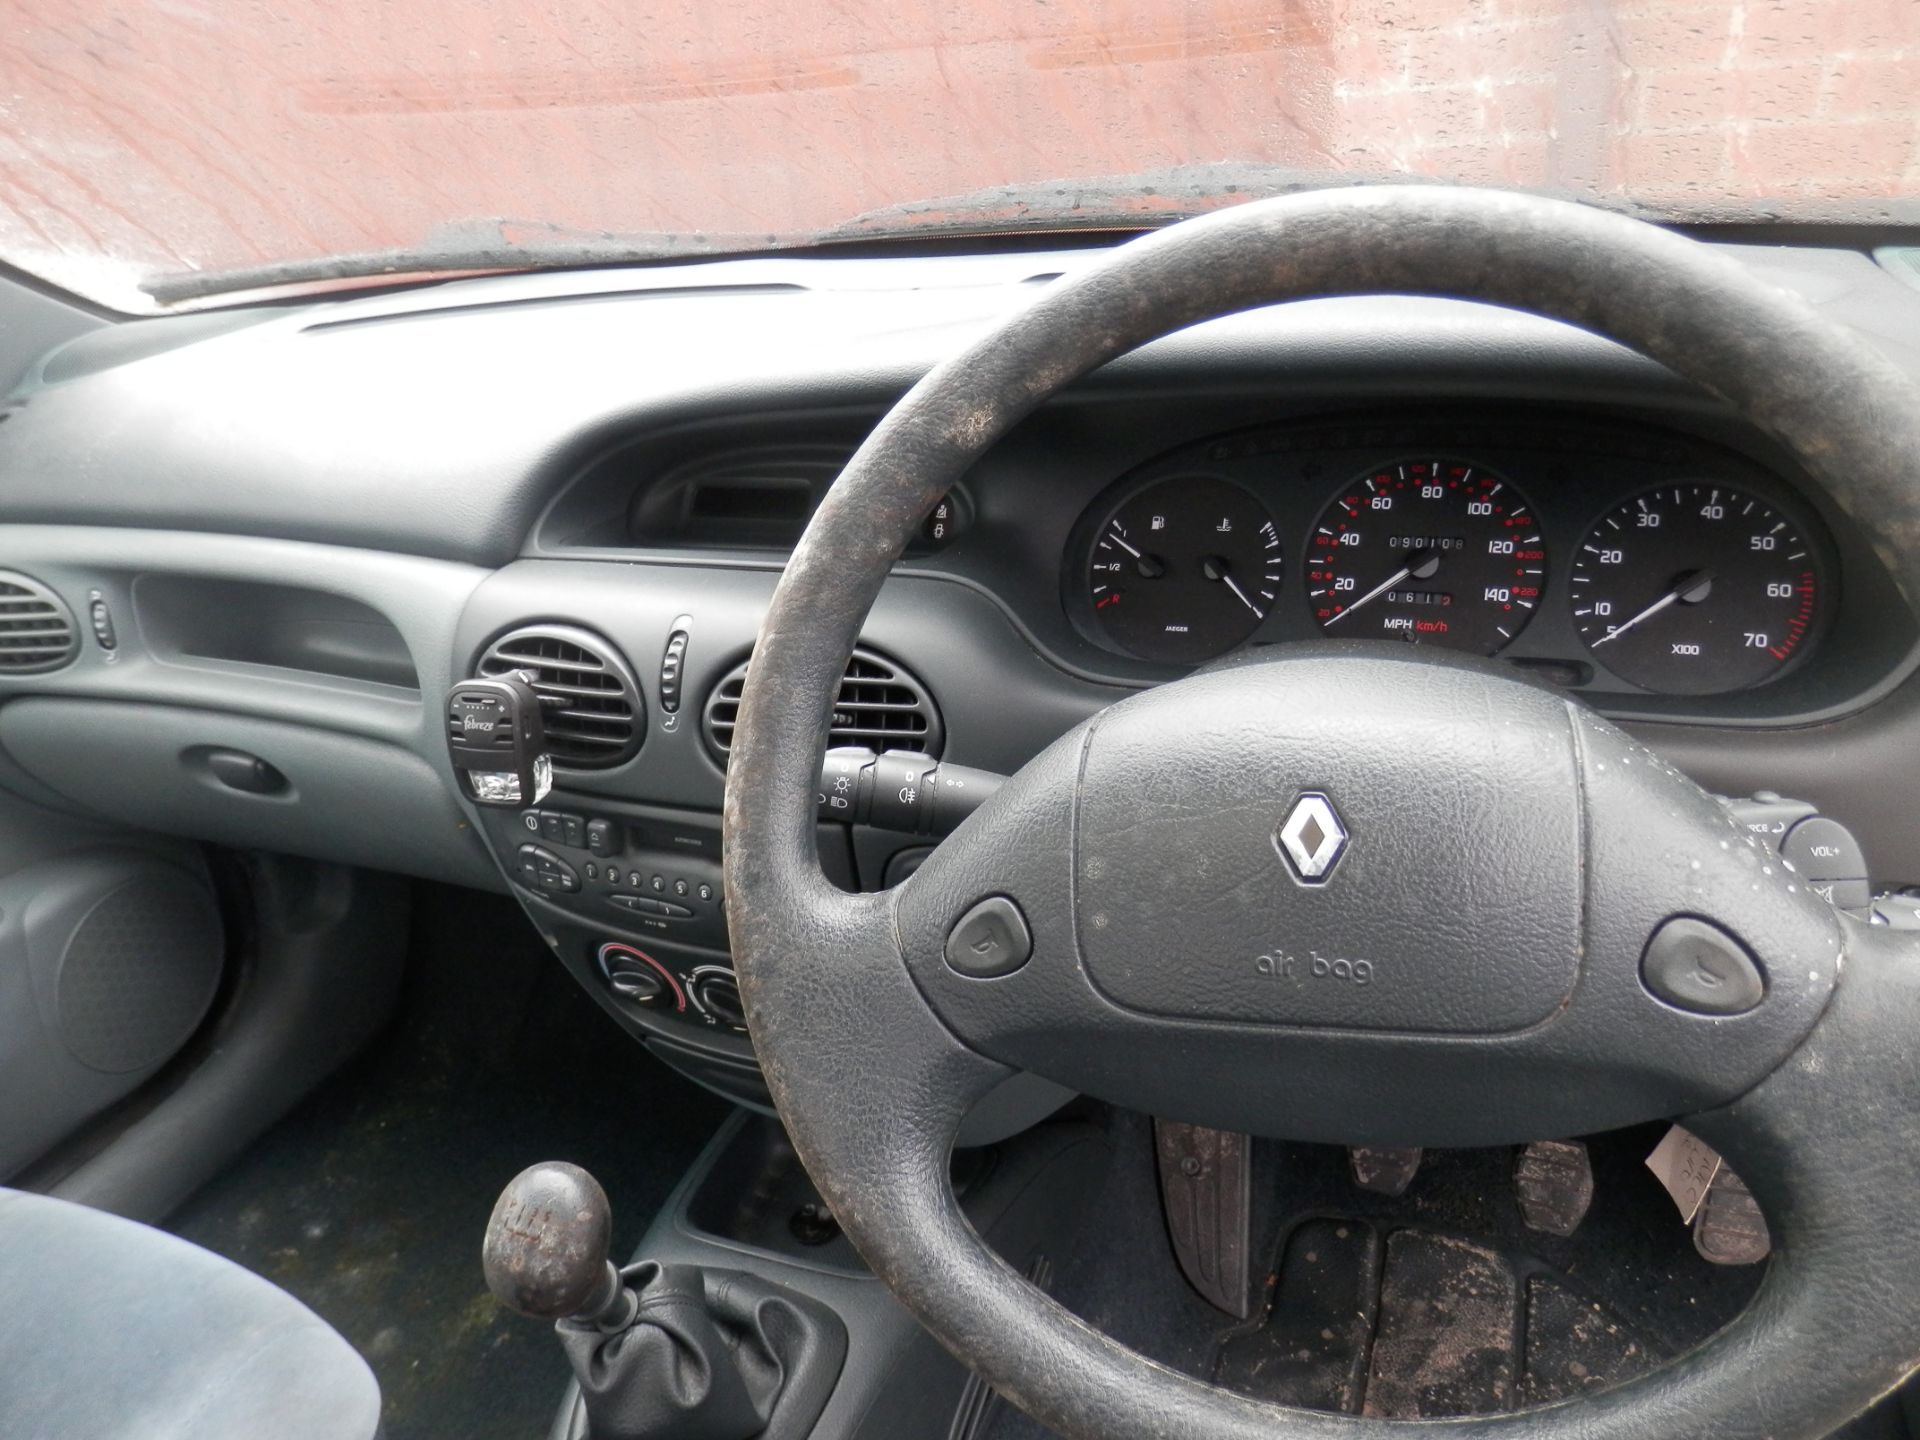 1996/P REG RENAULT MEGANE 1.6 PETROL, PX TRADE IN, WILL NOT START. TOO GOOD TO SCRAP !! NO RESERVE ! - Image 8 of 15